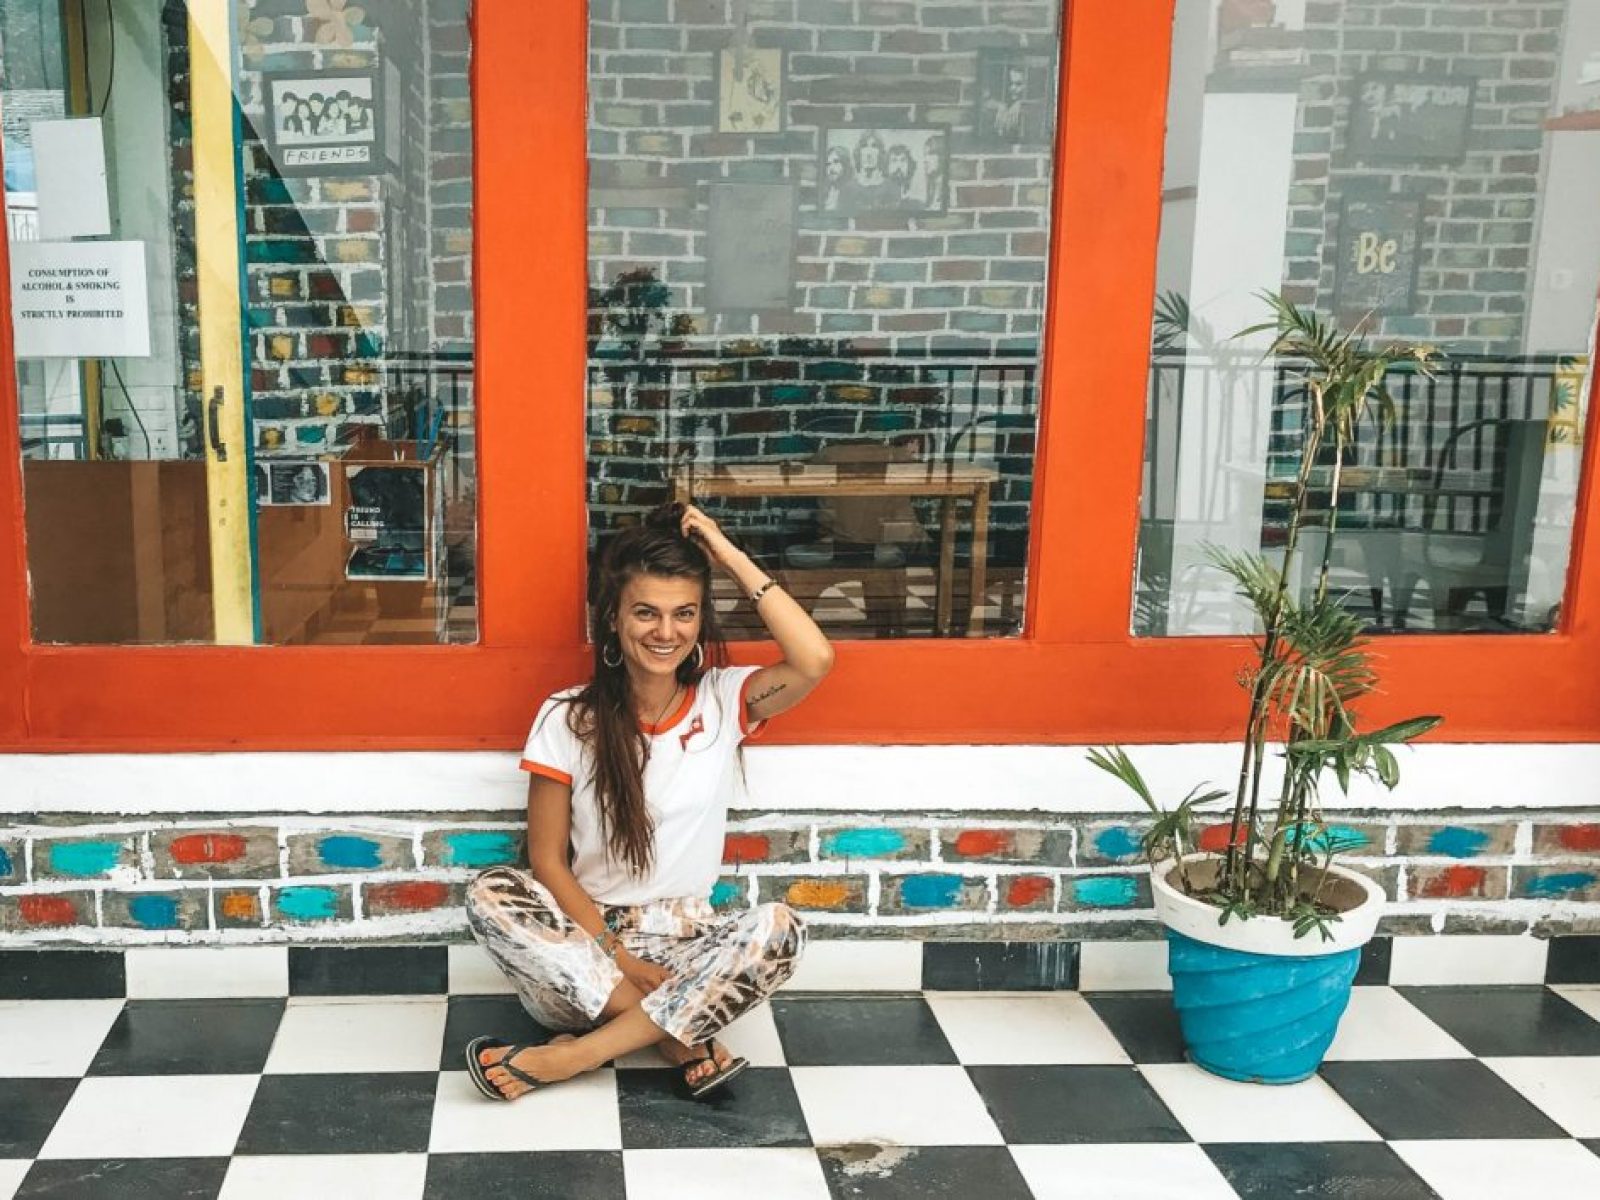 A girl sitting on the floor in the colorful hostel in India